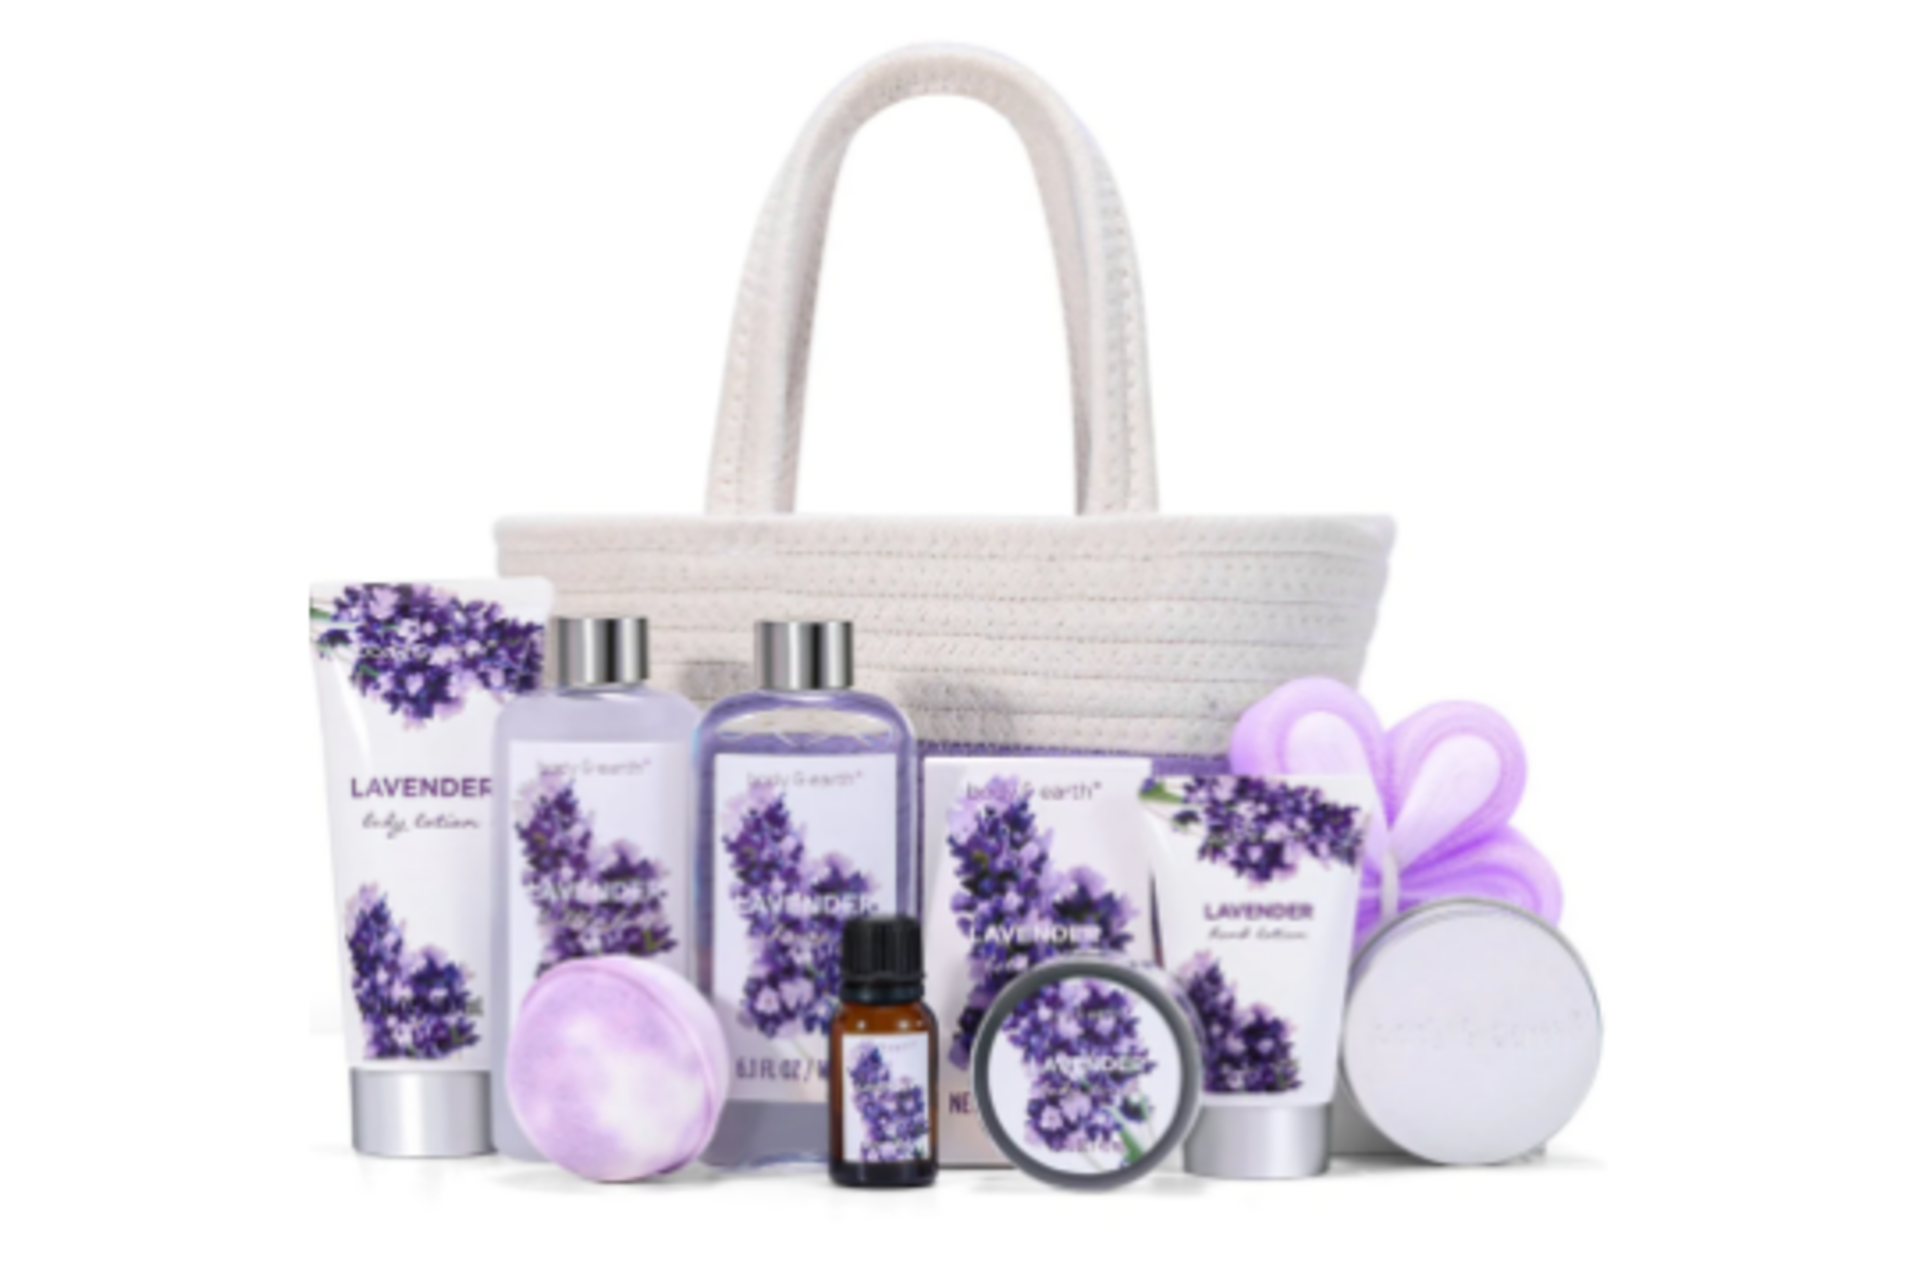 TRADE LOT 24 X NEW PACKAGED Body & Earth Lavender Spa Basket Set. (BE-BP-010) Nourishing